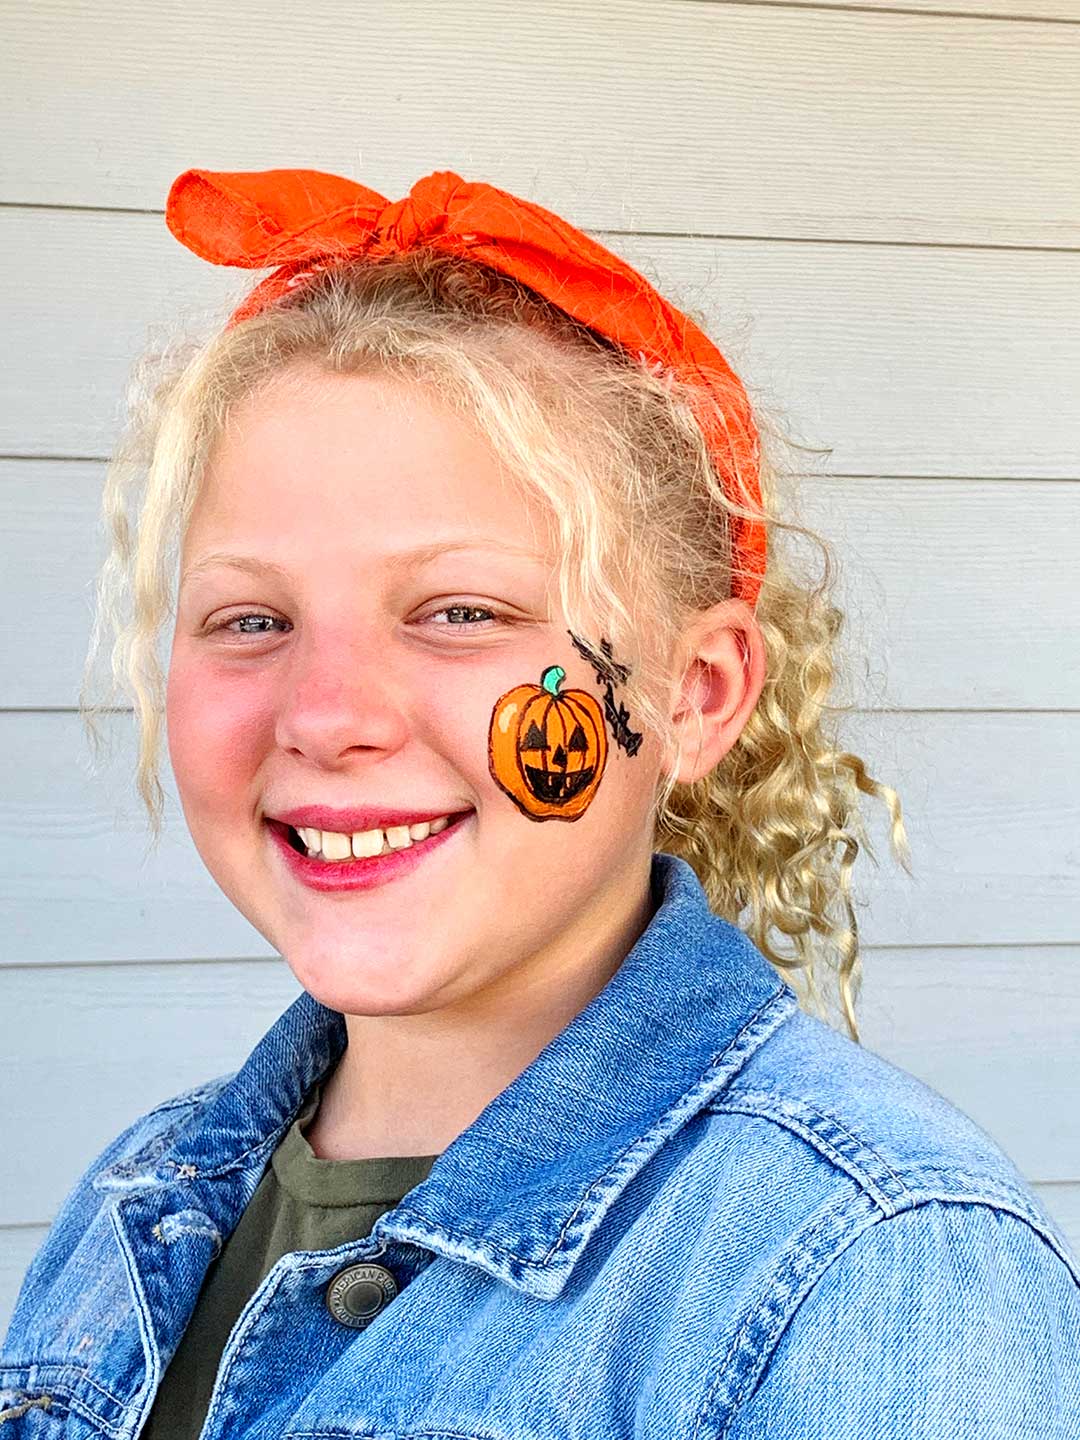 Girl with blonde curly hair smiling at camera with jack-o-lantern face painting on cheek.